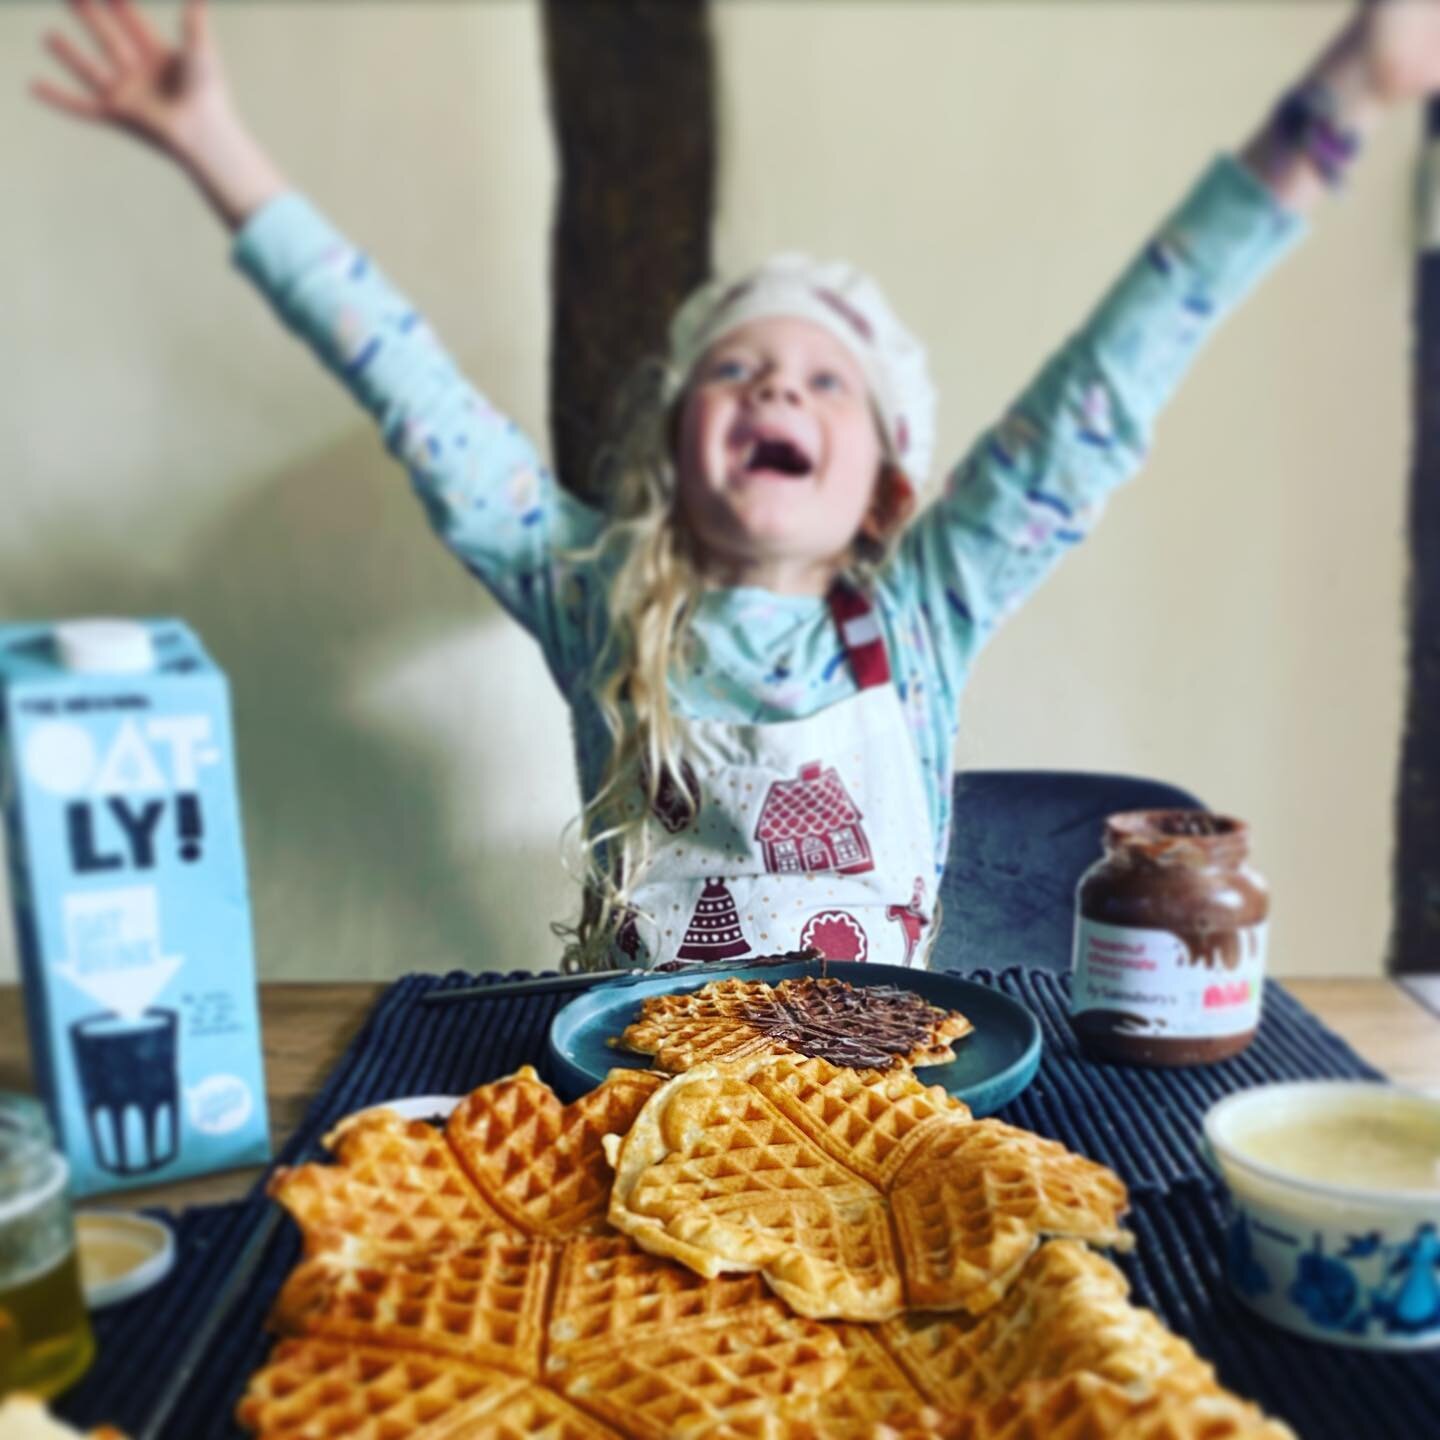 Who doesn&rsquo;t get excited about #waffles for brunch #vaffler #nordiccooking #hygge #kos